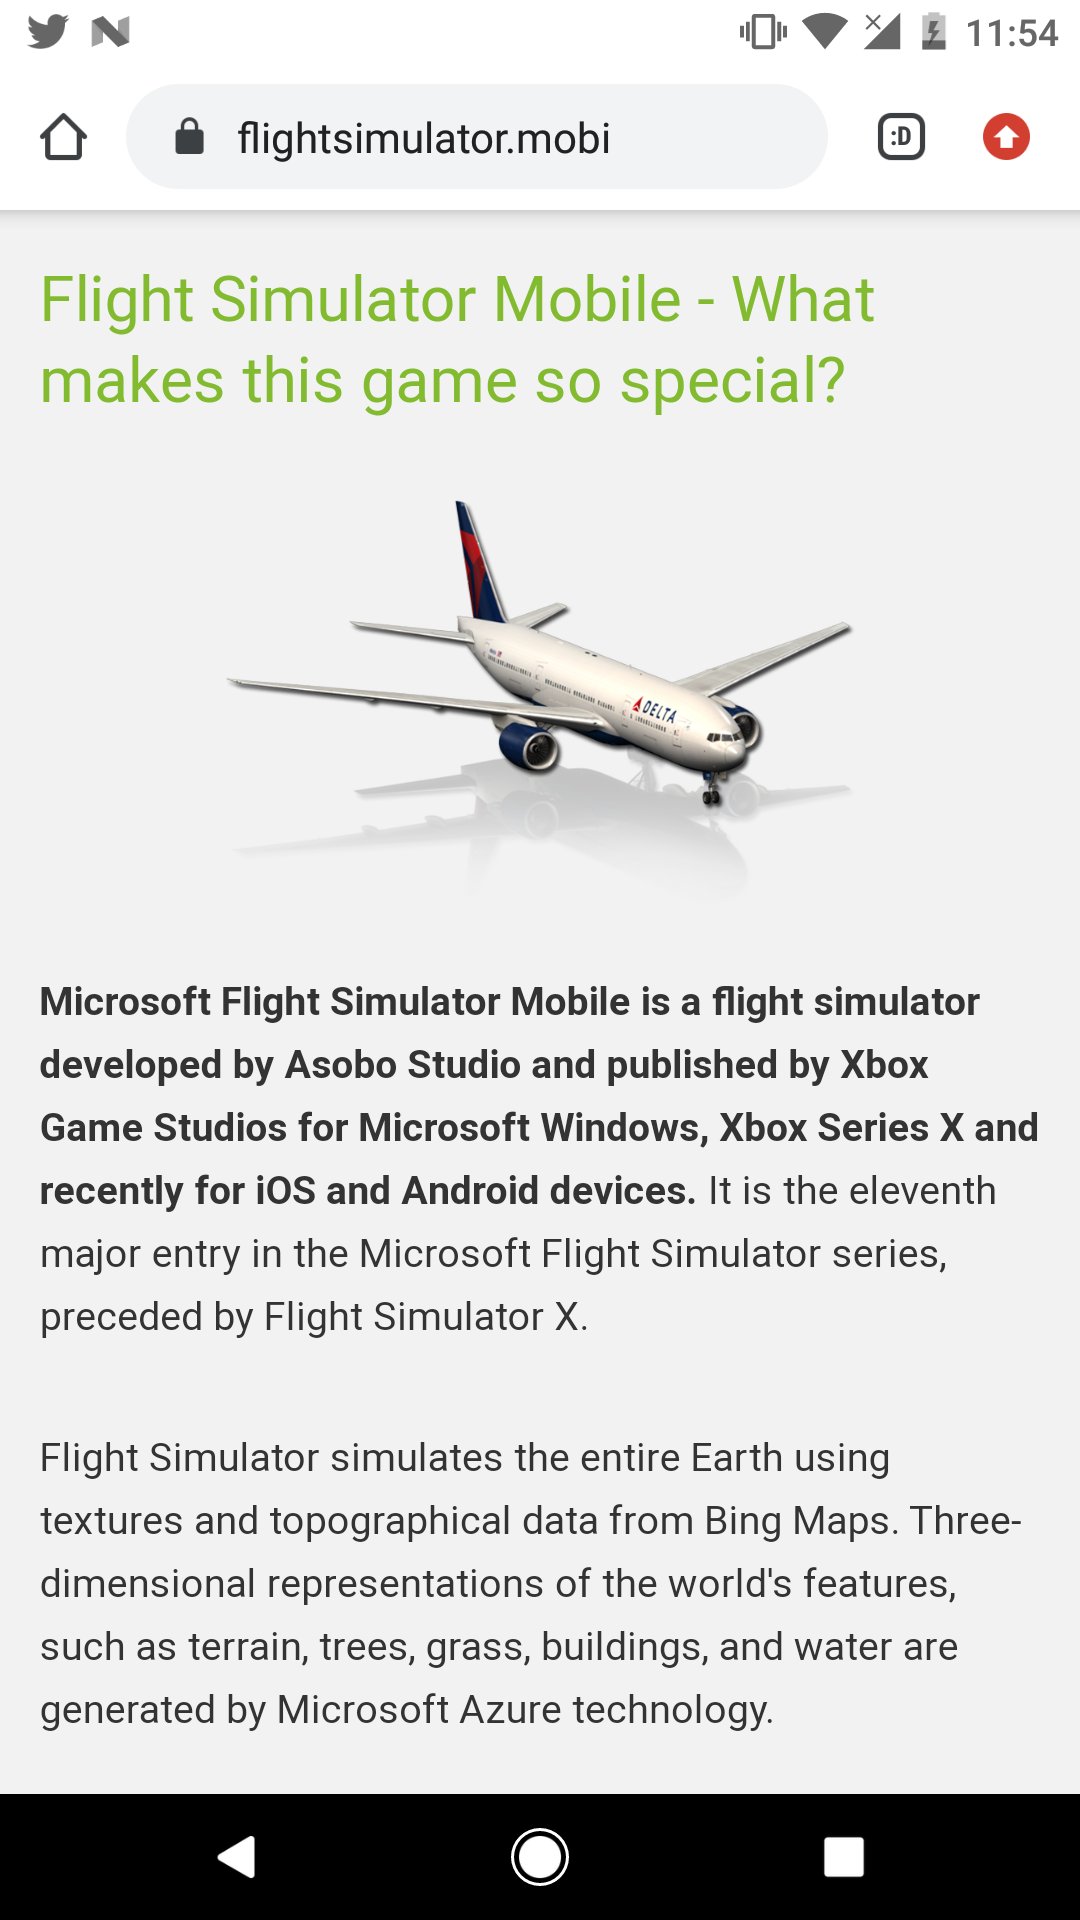 ESET Research on X: Fake Flight Simulator app #ESETresearch identified a  malicious app impersonating the popular Microsoft Flight Simulator 2020,  distributed via # and hosted on a domain mimicking the game's name.